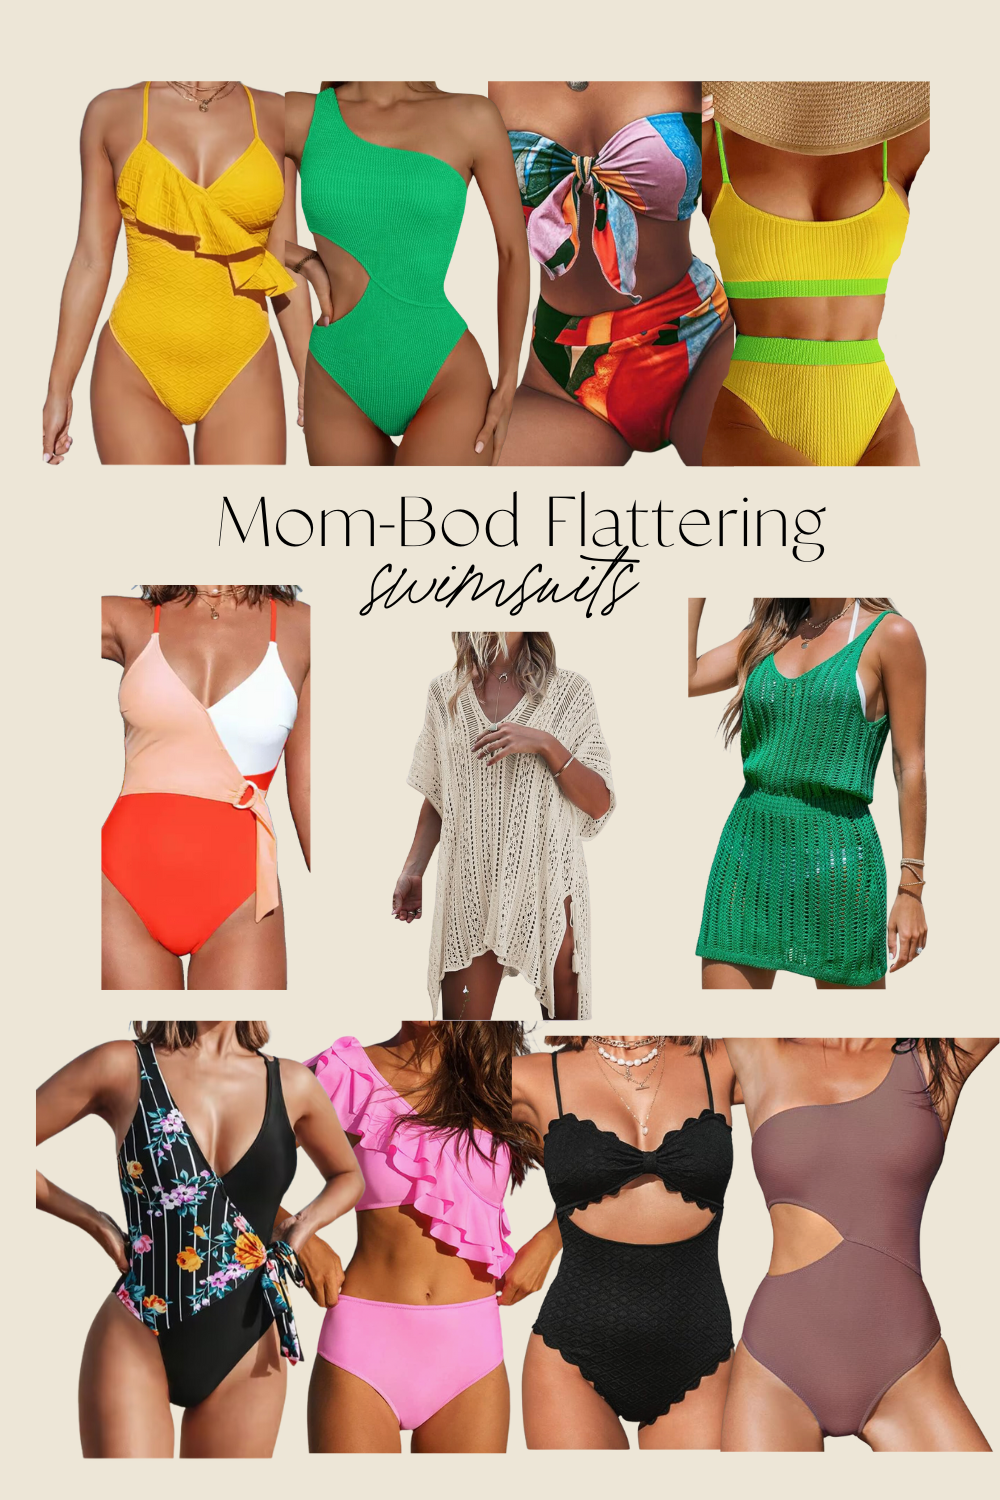 Shop Flattering Swimsuits for Moms